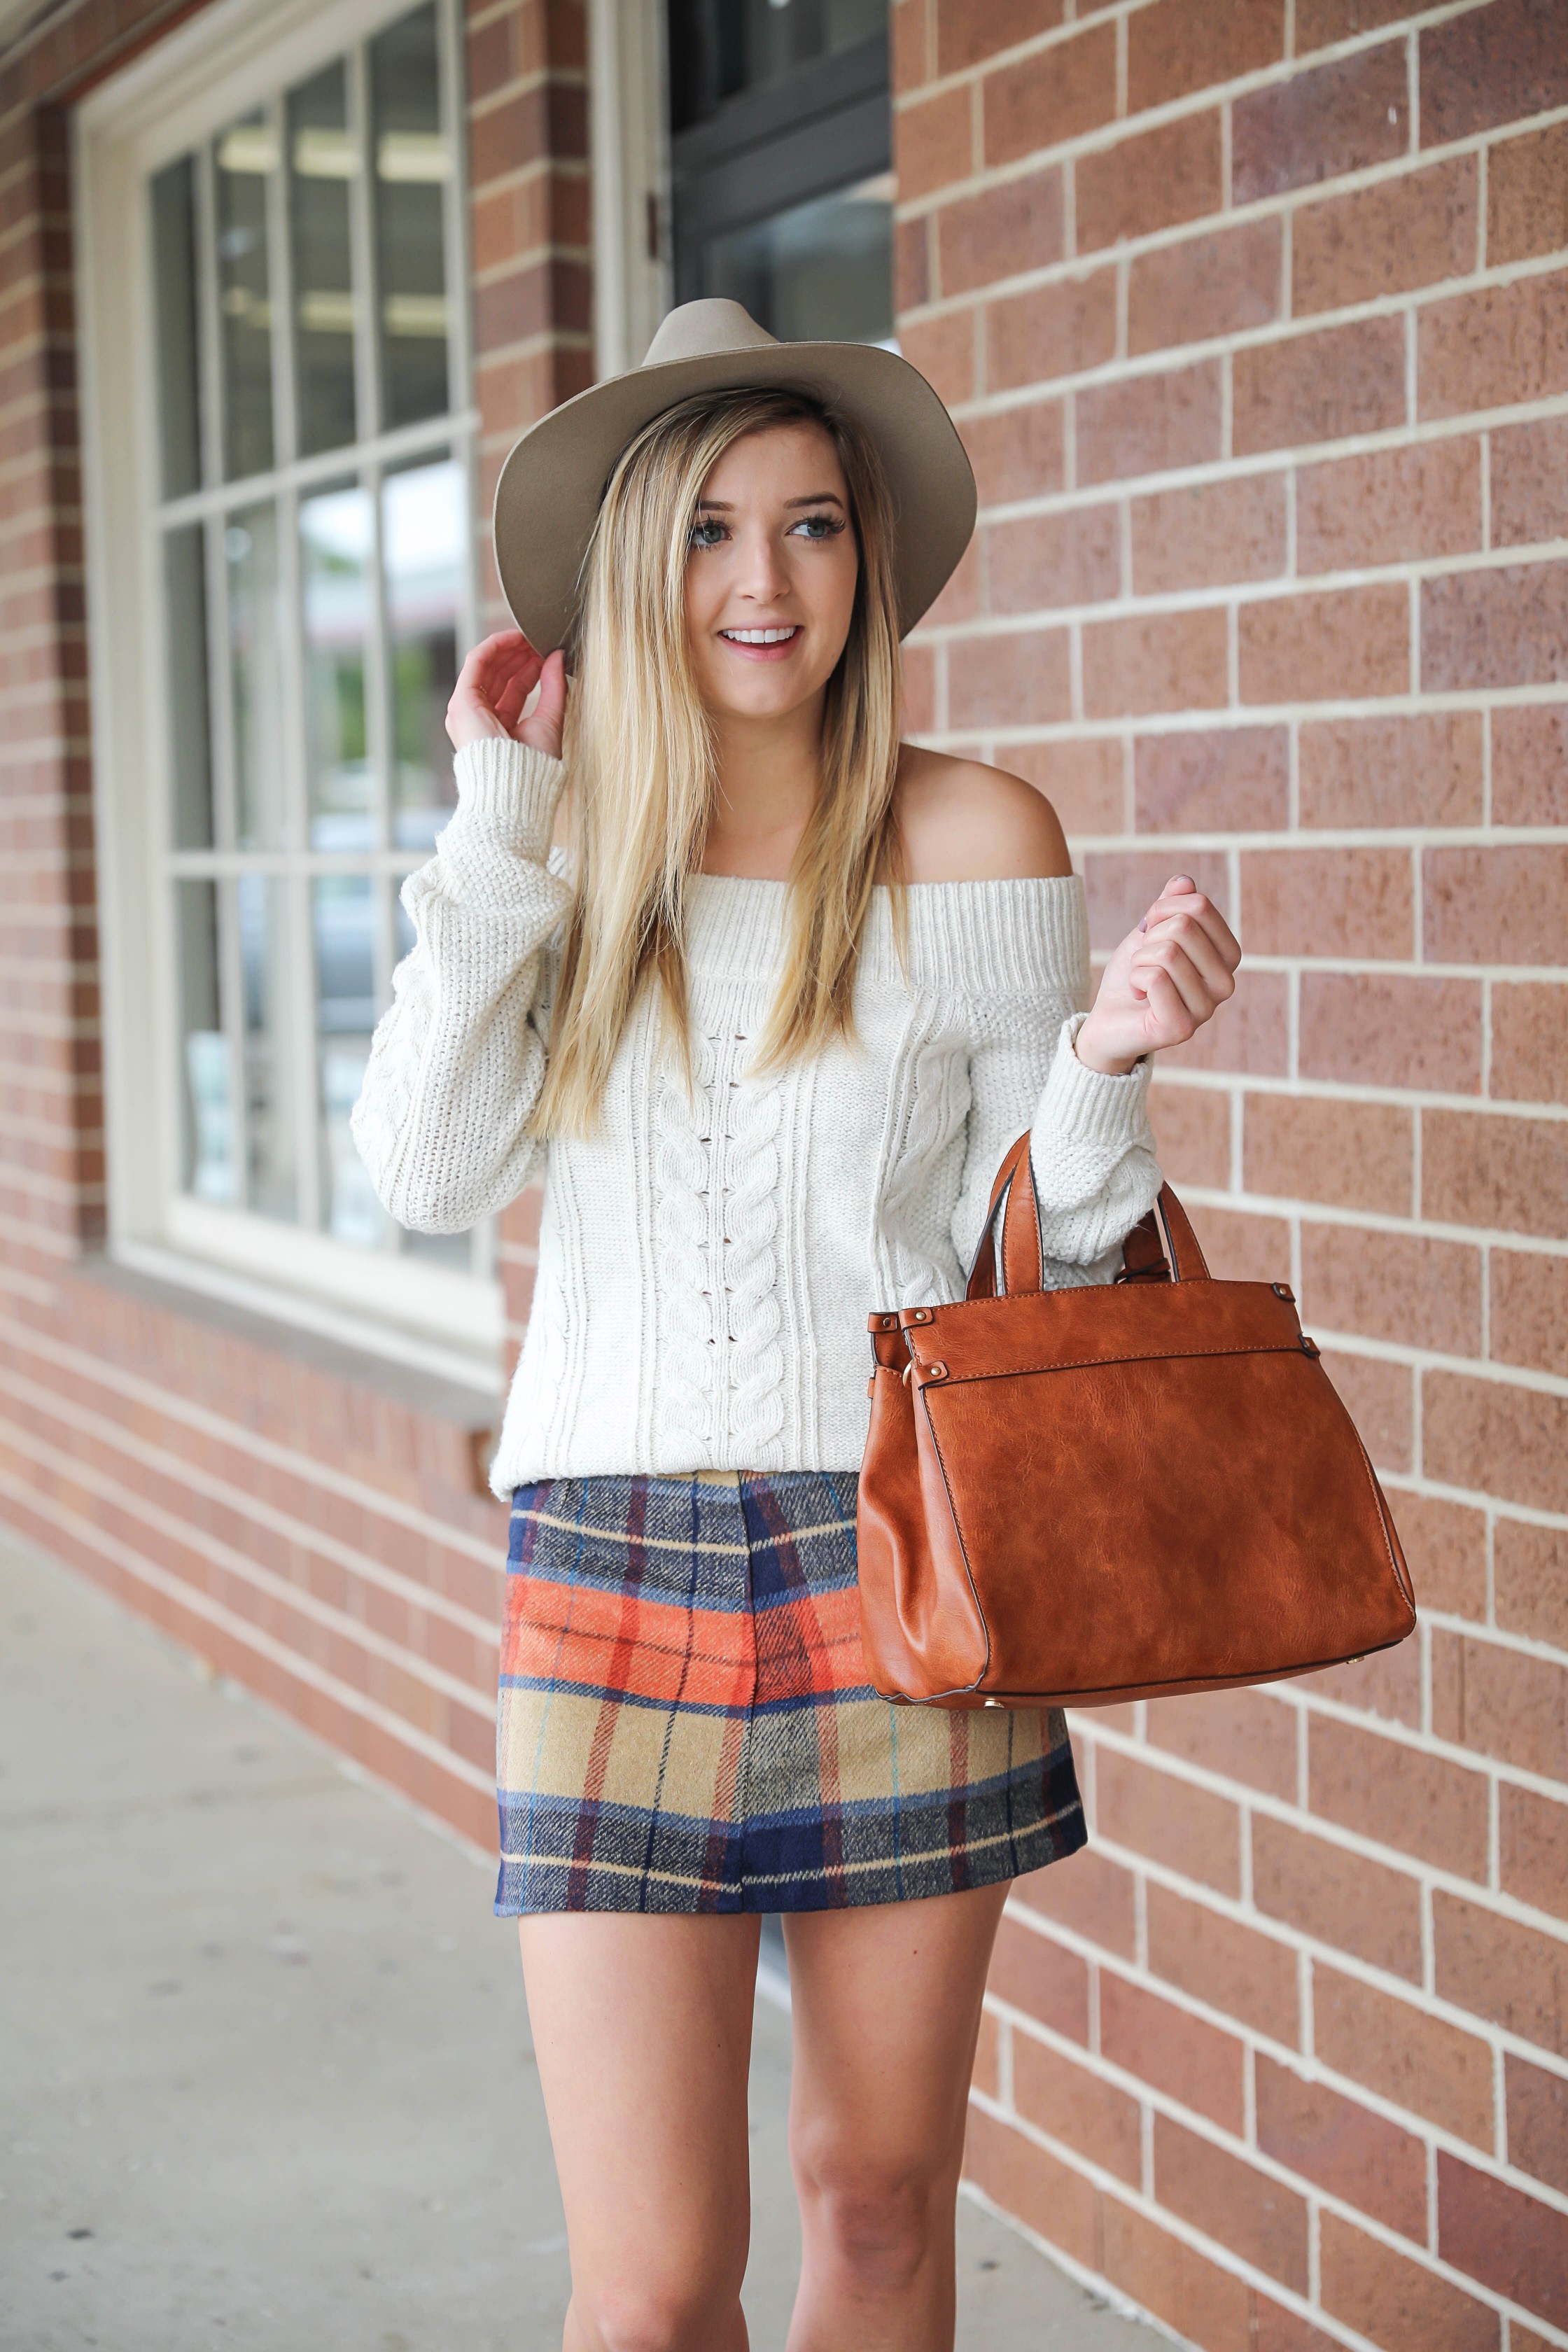 Plaid skirt with a cute cream knit off the shoulder sweater! The cutest fall outfit with a fun faux leather bag! Cute Abercrombie and Fitch and Lulu's fashion! Details on fashion blog daily dose of charm by Lauren Lindmark